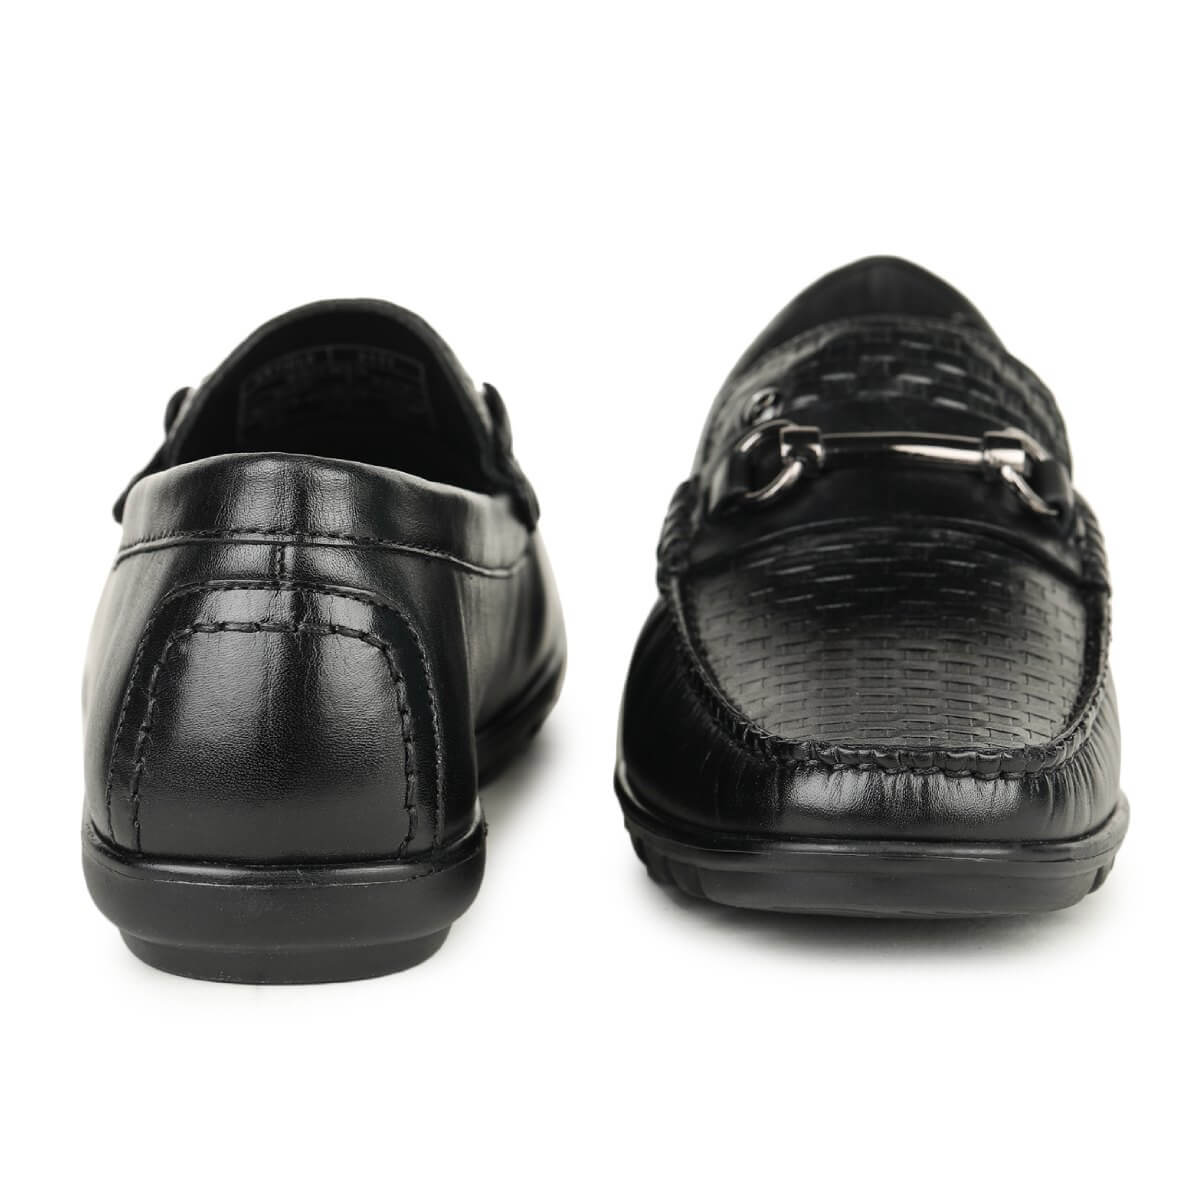 Mat Style Loafers For Men7